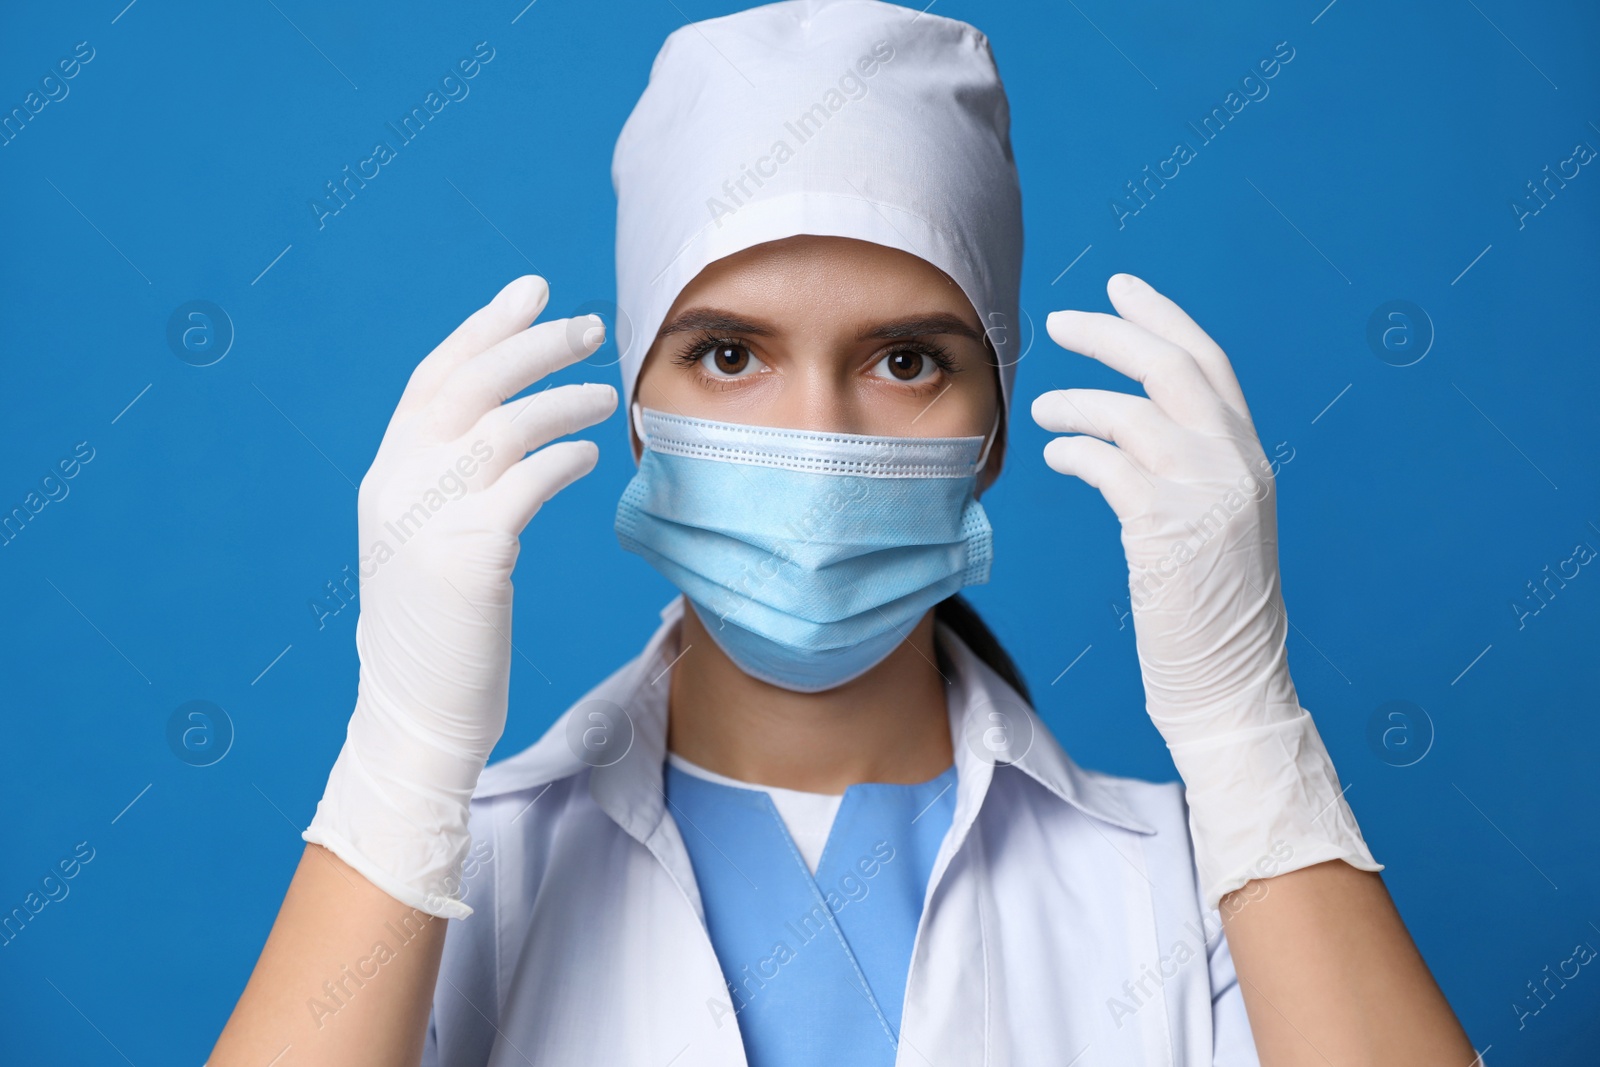 Photo of Doctor in protective mask and medical gloves against blue background